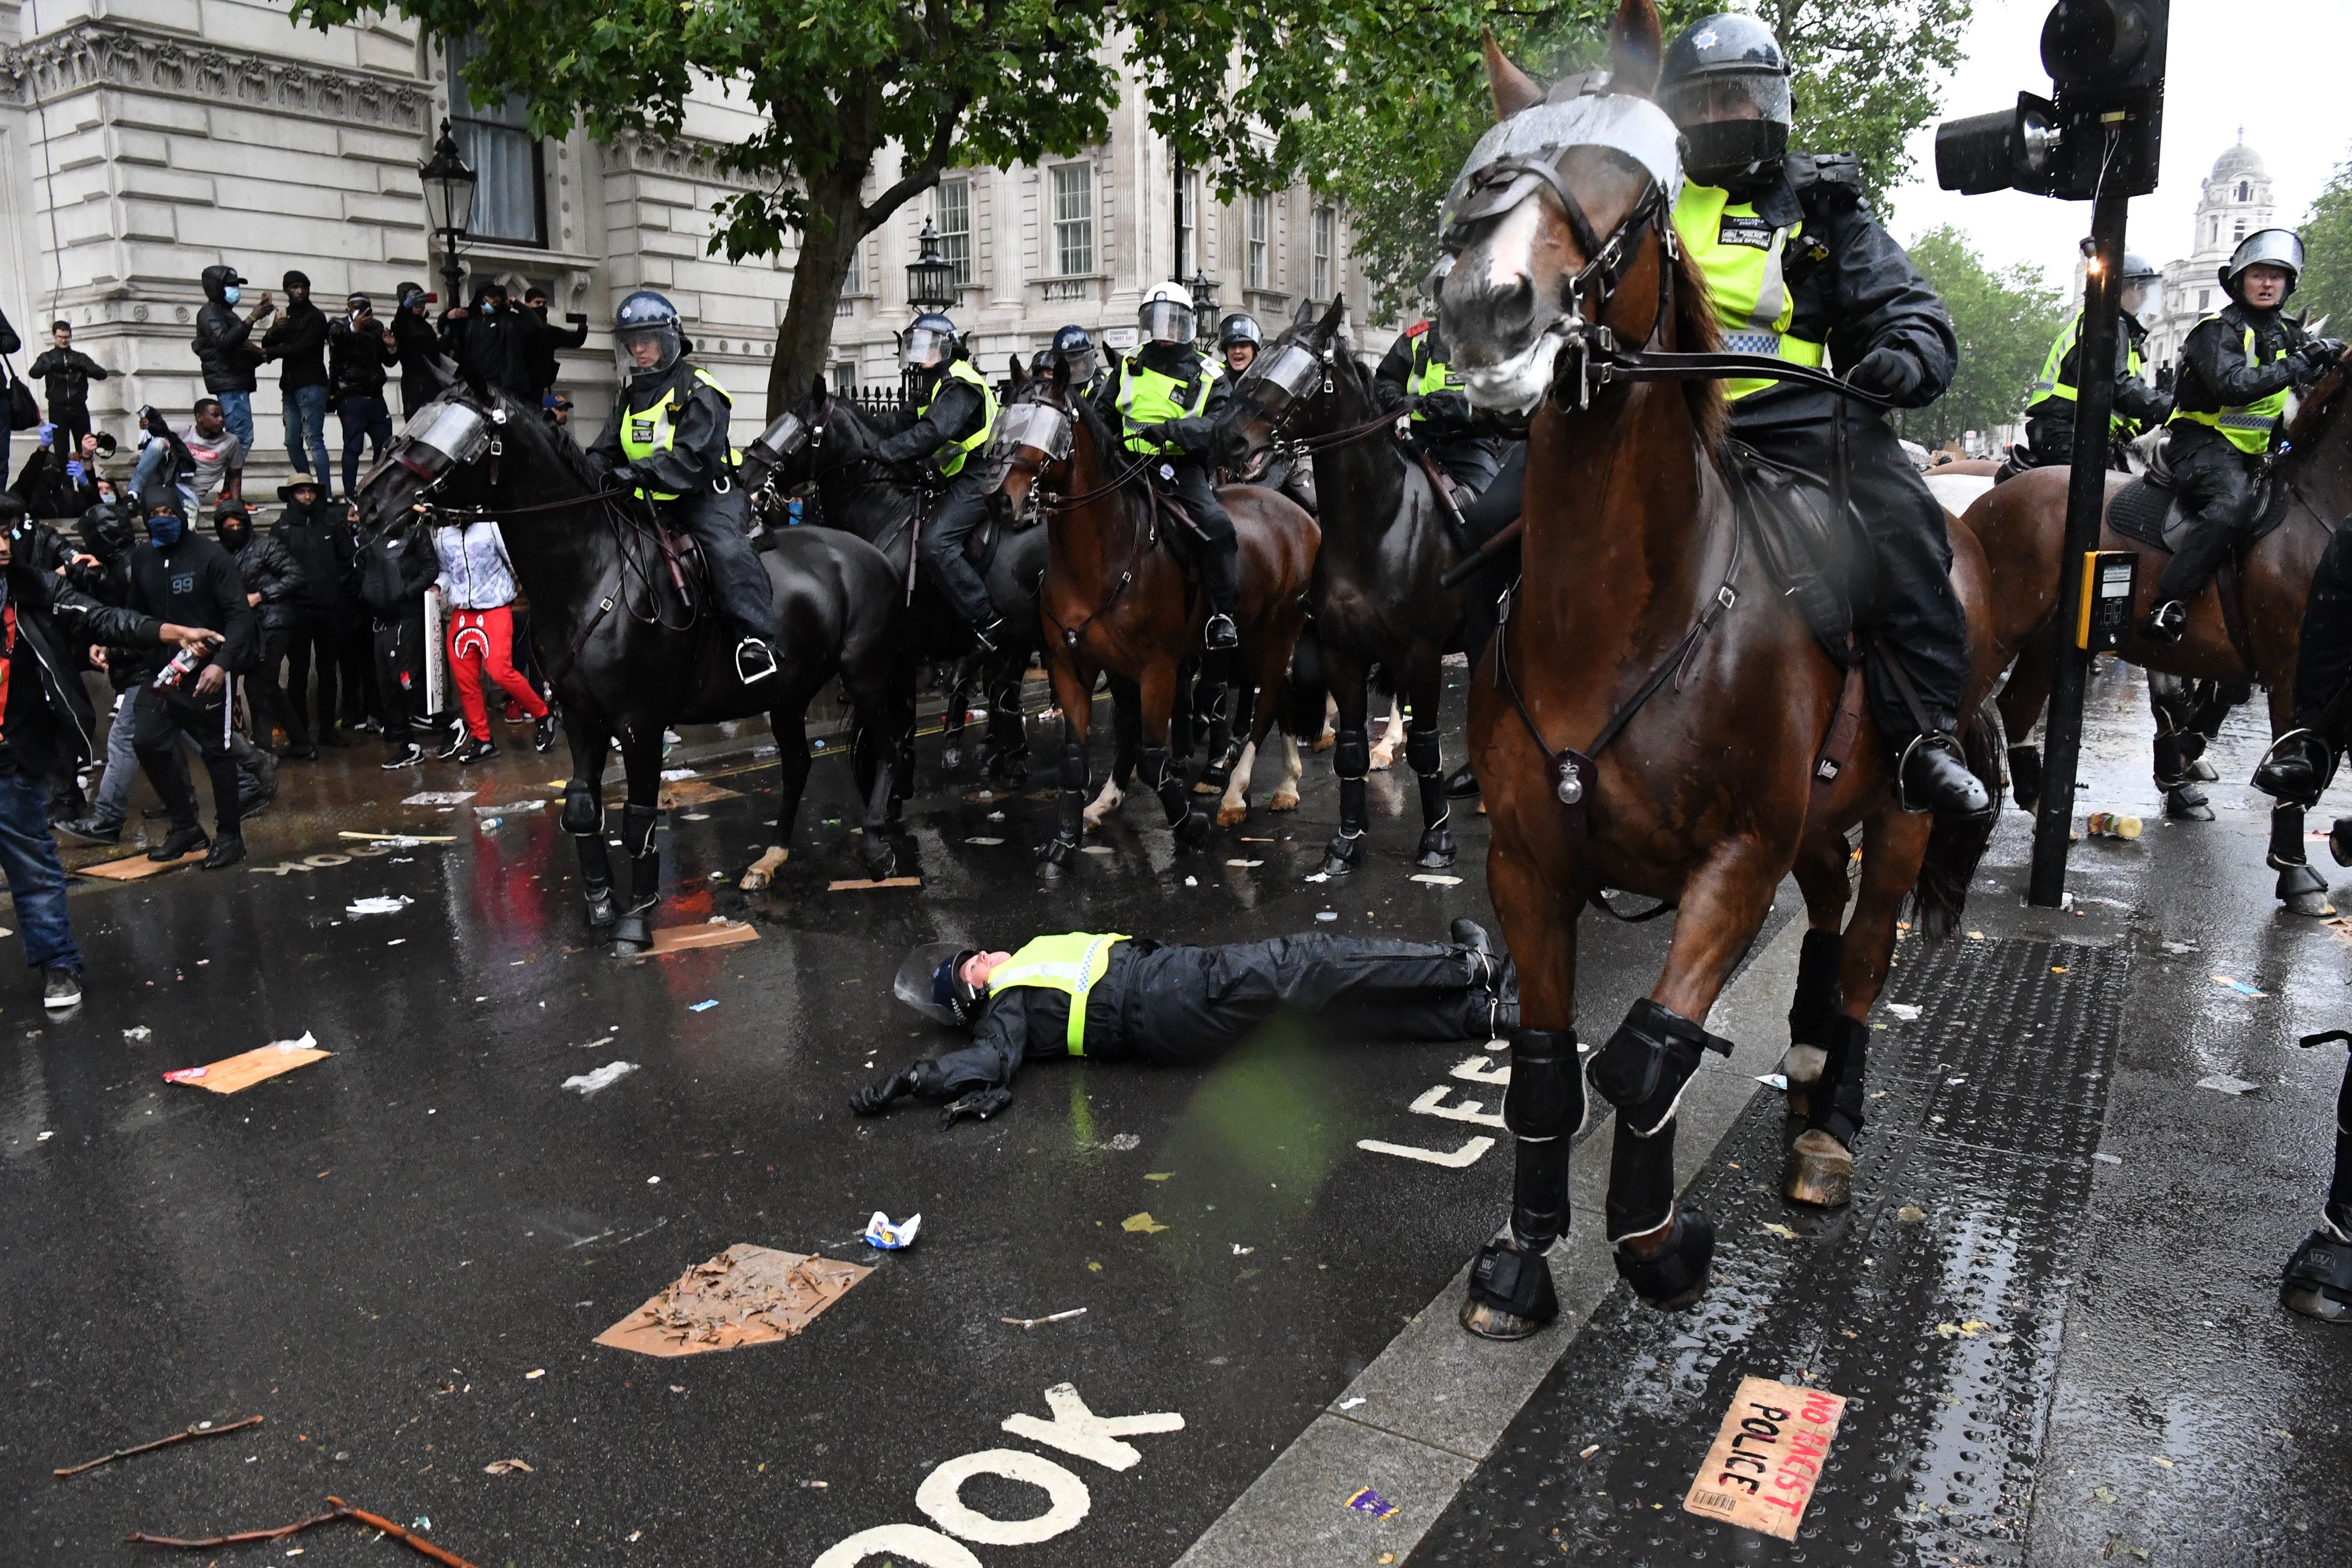 riot civil unrest what to do on horse mission